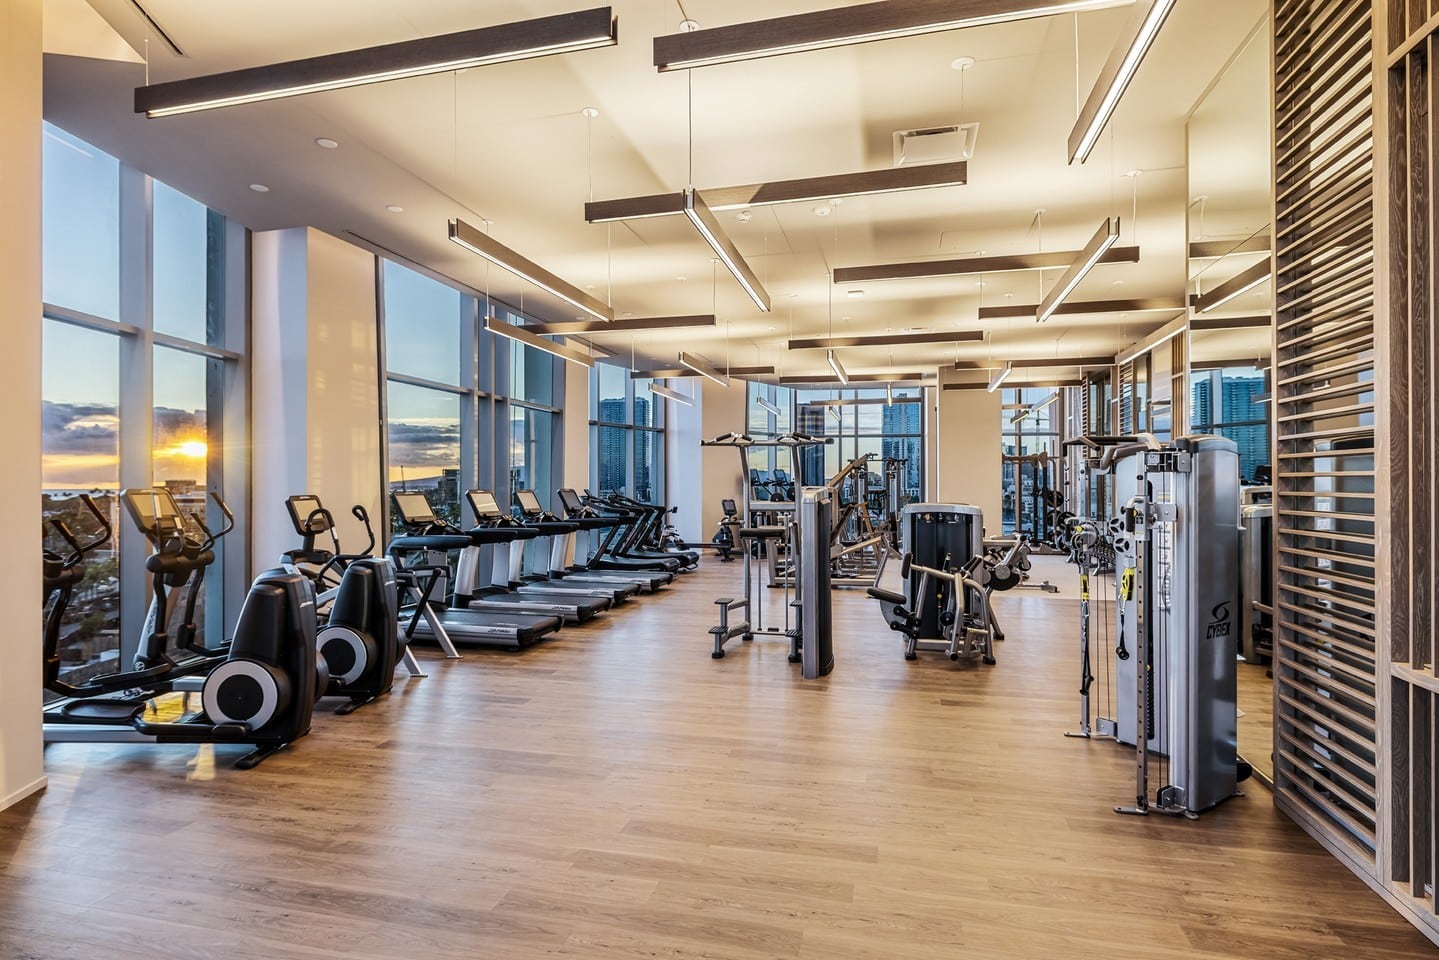 At Kōʻula, start your morning in the state-of-the-art fitness center with ocean views or exercise in the outdoor fitness pavilion. Visit koulawardvillage.com to learn more about this indoor-outdoor lifestyle.